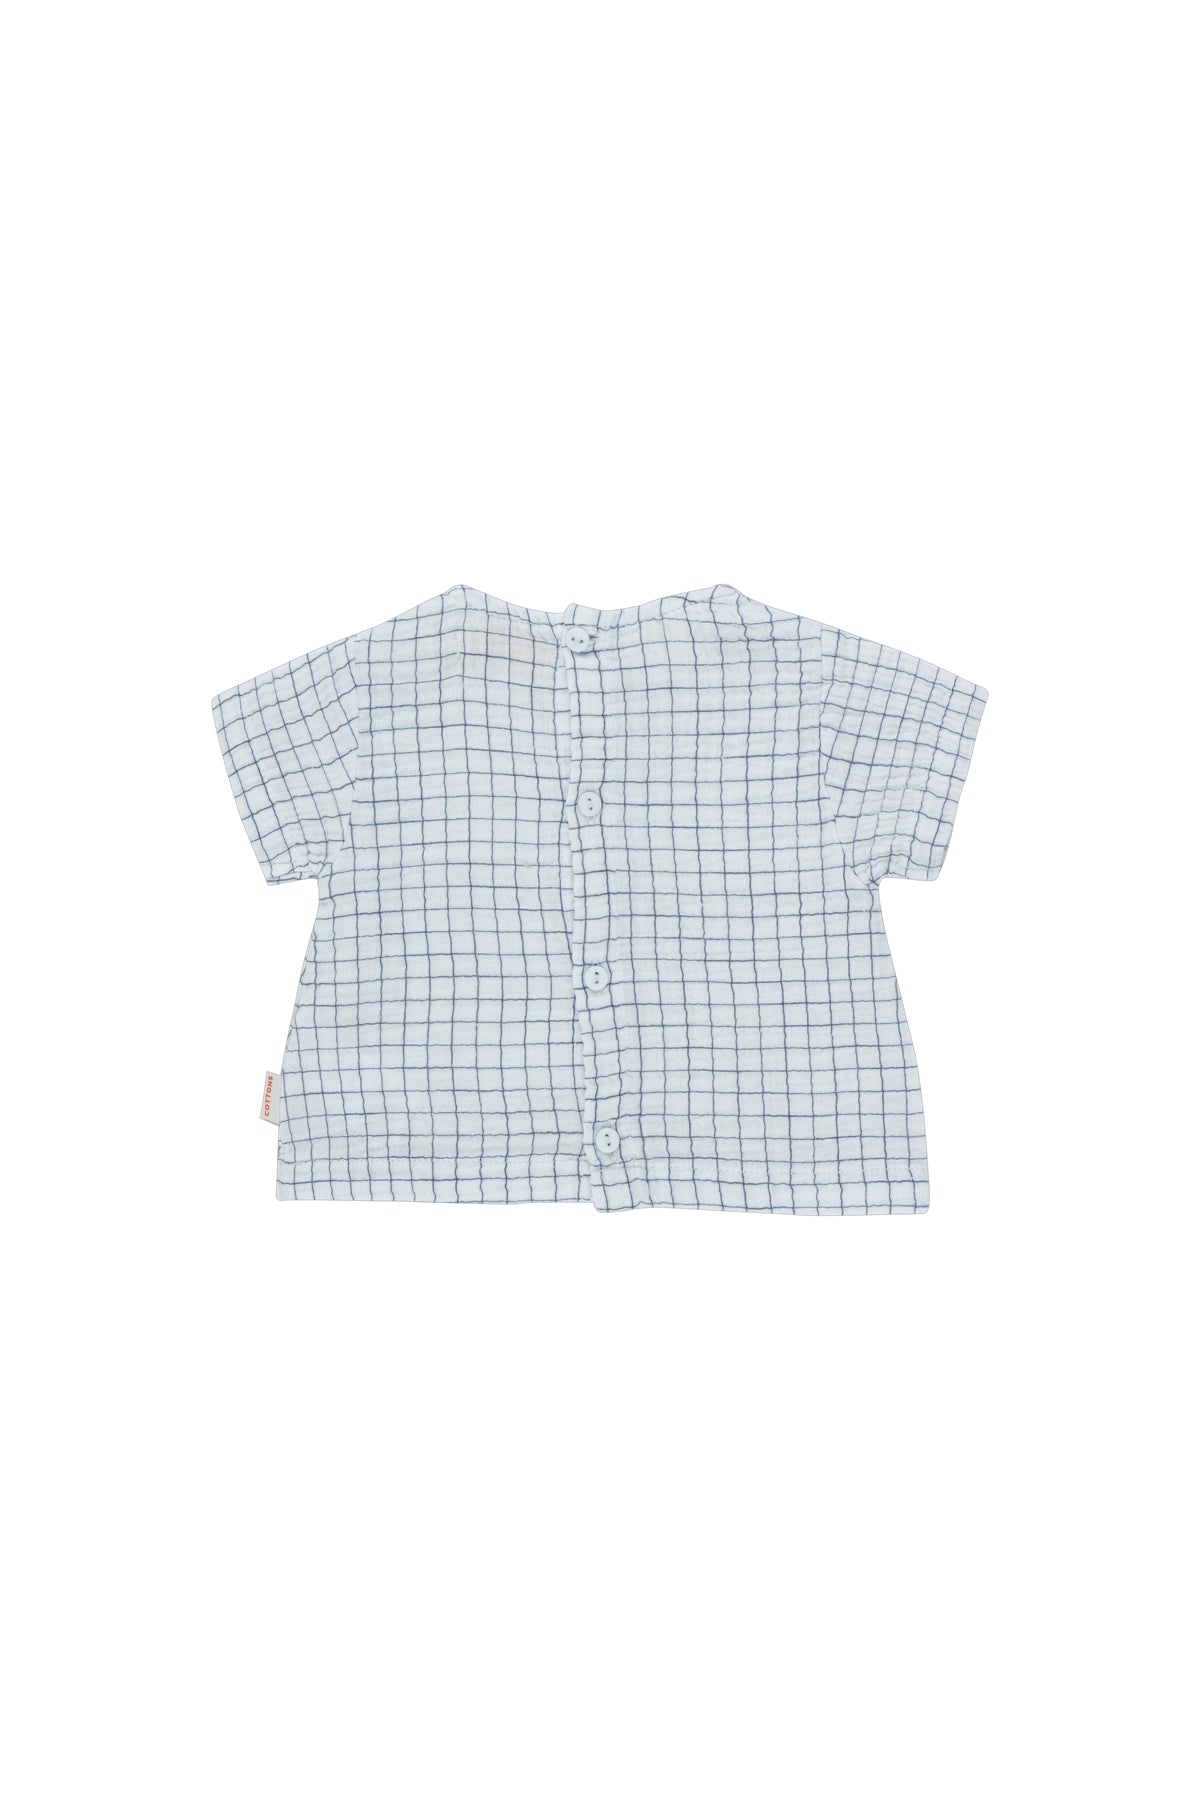 Tiny Cottons Grid Baby Shirt